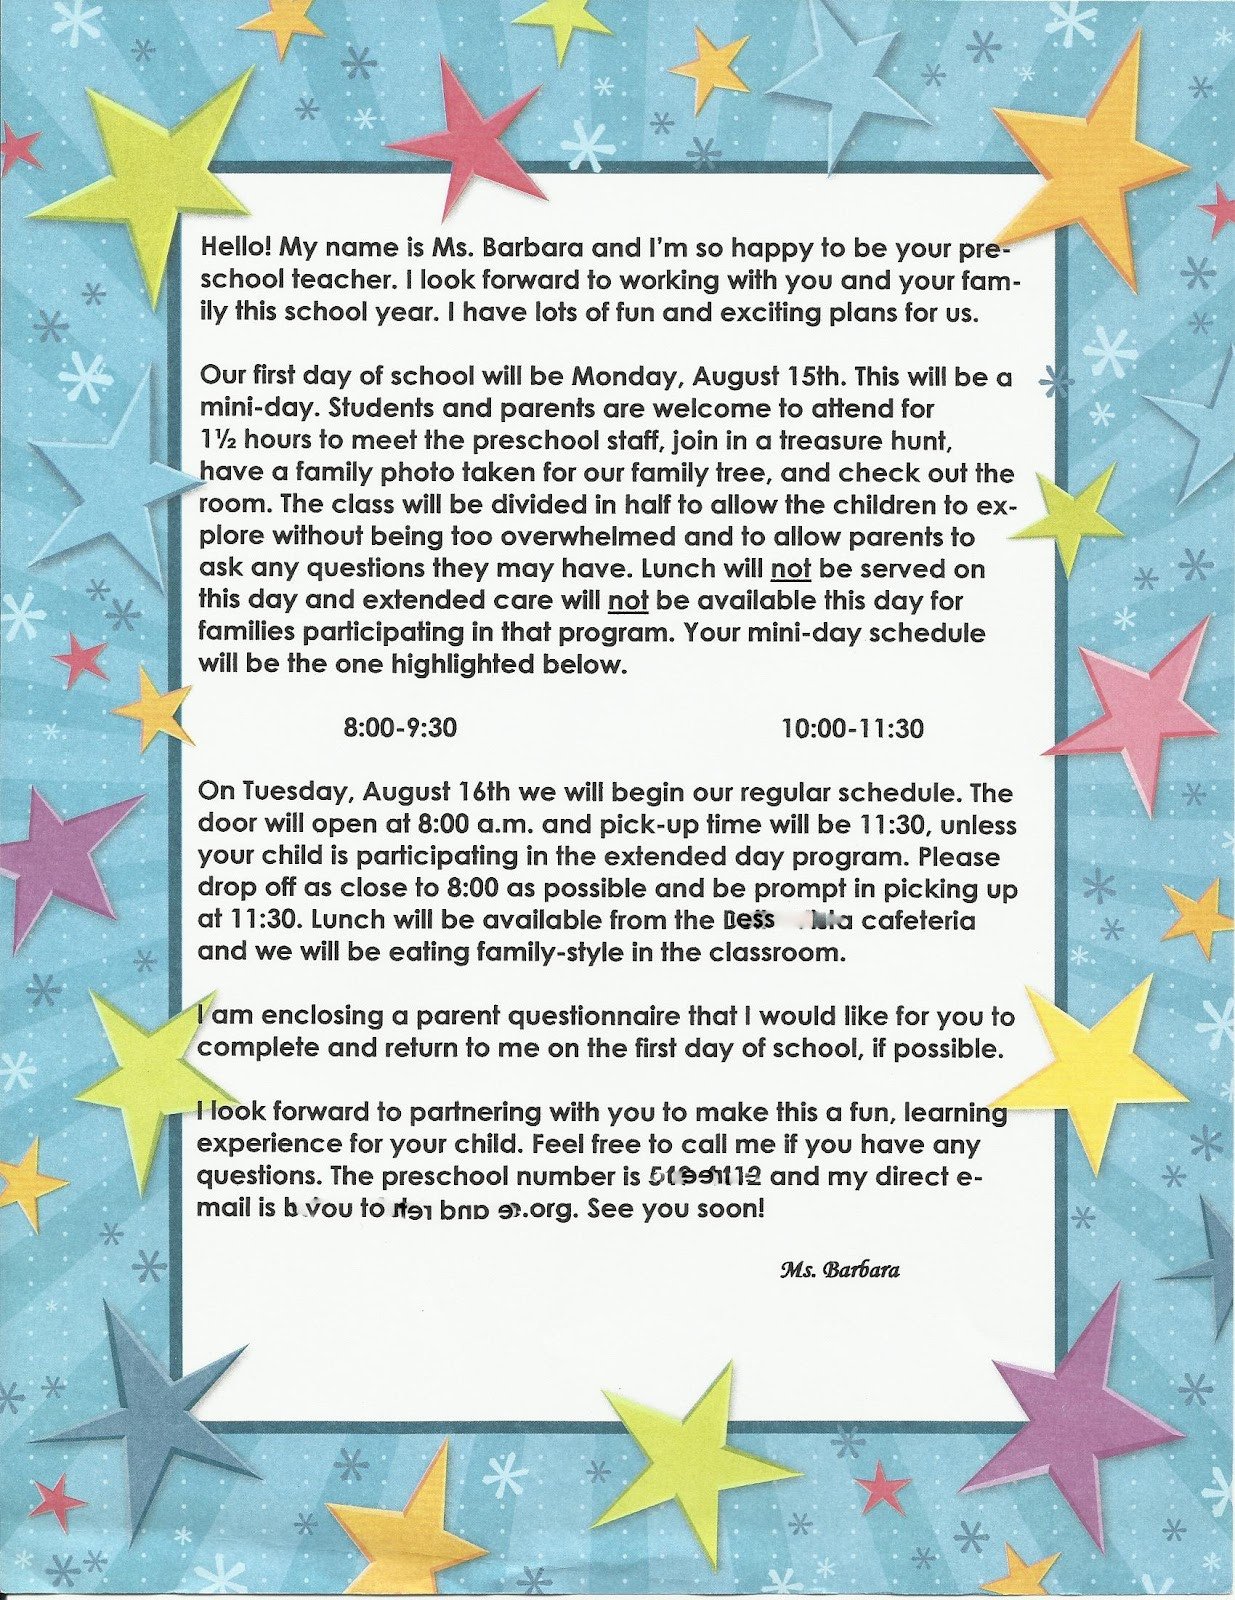 Preschool Welcome Letter Template for the Children Preschool Time Wel Ing Parents and